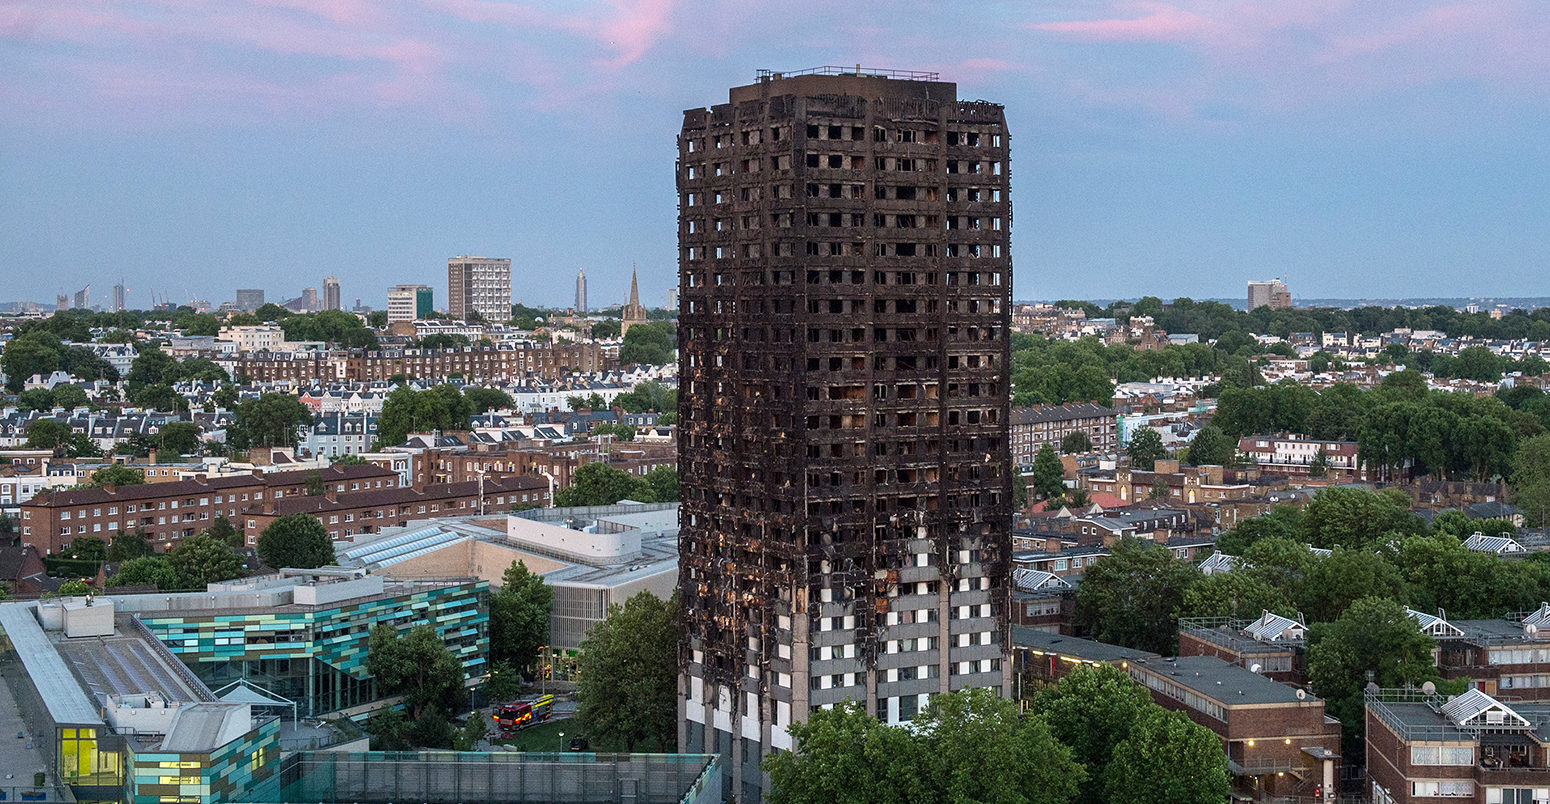 Grenfell Tower, Fire Brigades Union, U.K. austerity cuts, wealth inequality, rising inequality, firefighter cuts, social services cuts, Jeremy Corbyn, David Cameron, Tory austerity measures